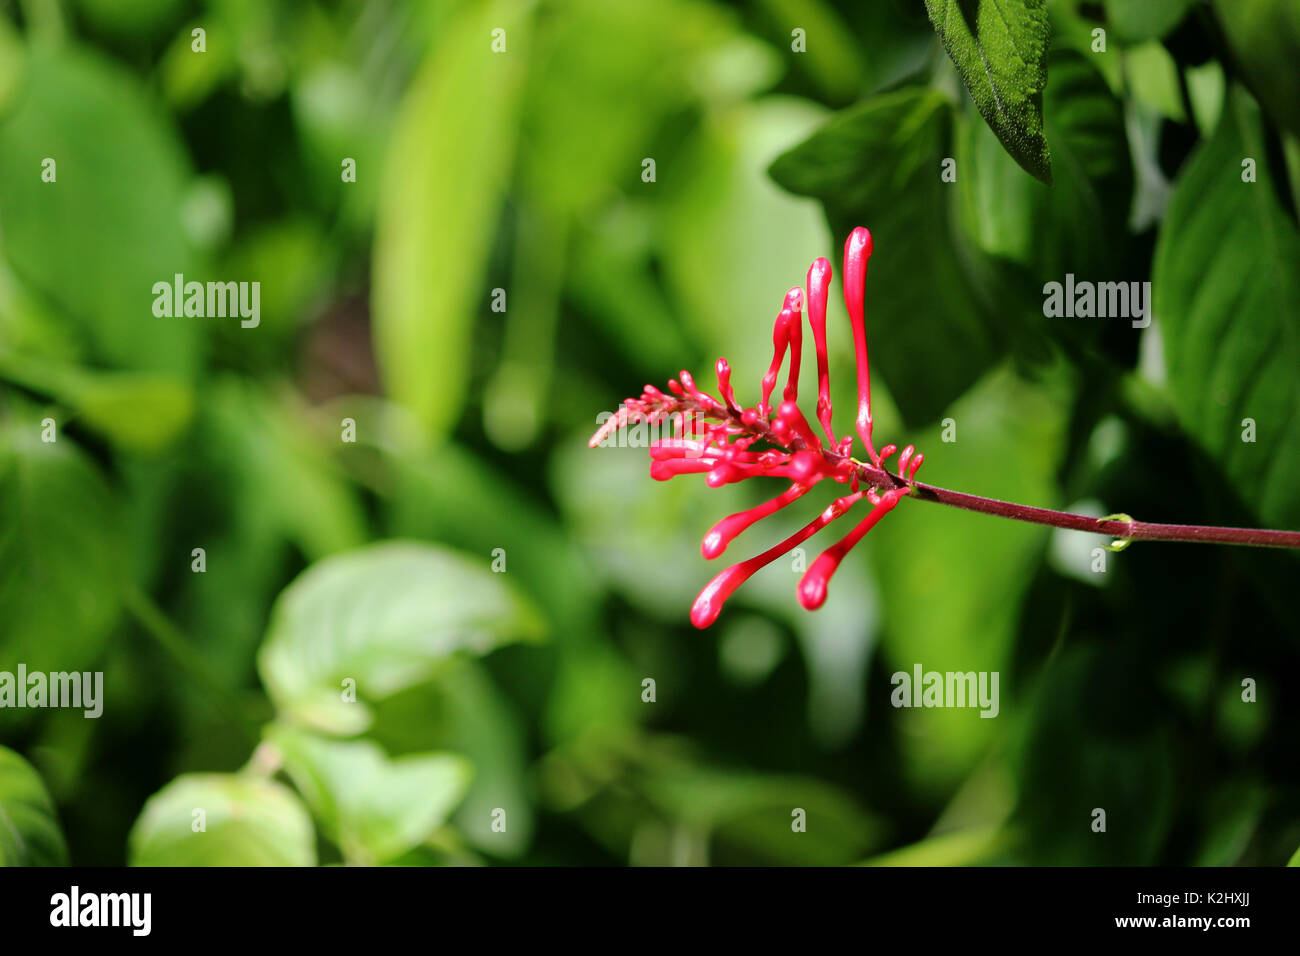 A Red Plant / Flower about to bloom with a green leafy background. Stock Photo